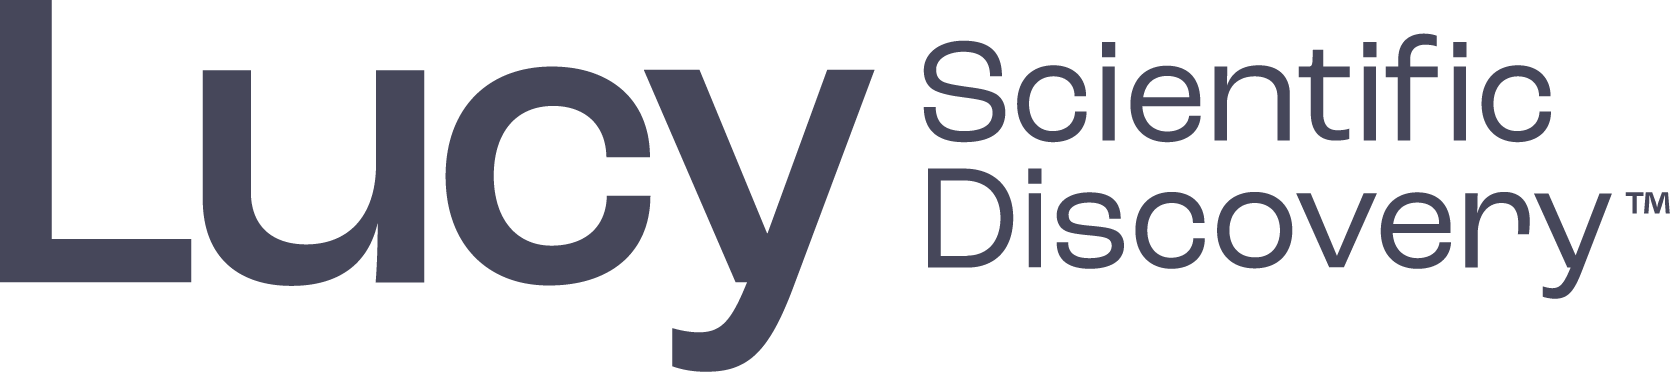 Lucy Scientific Discovery Inc. Logo